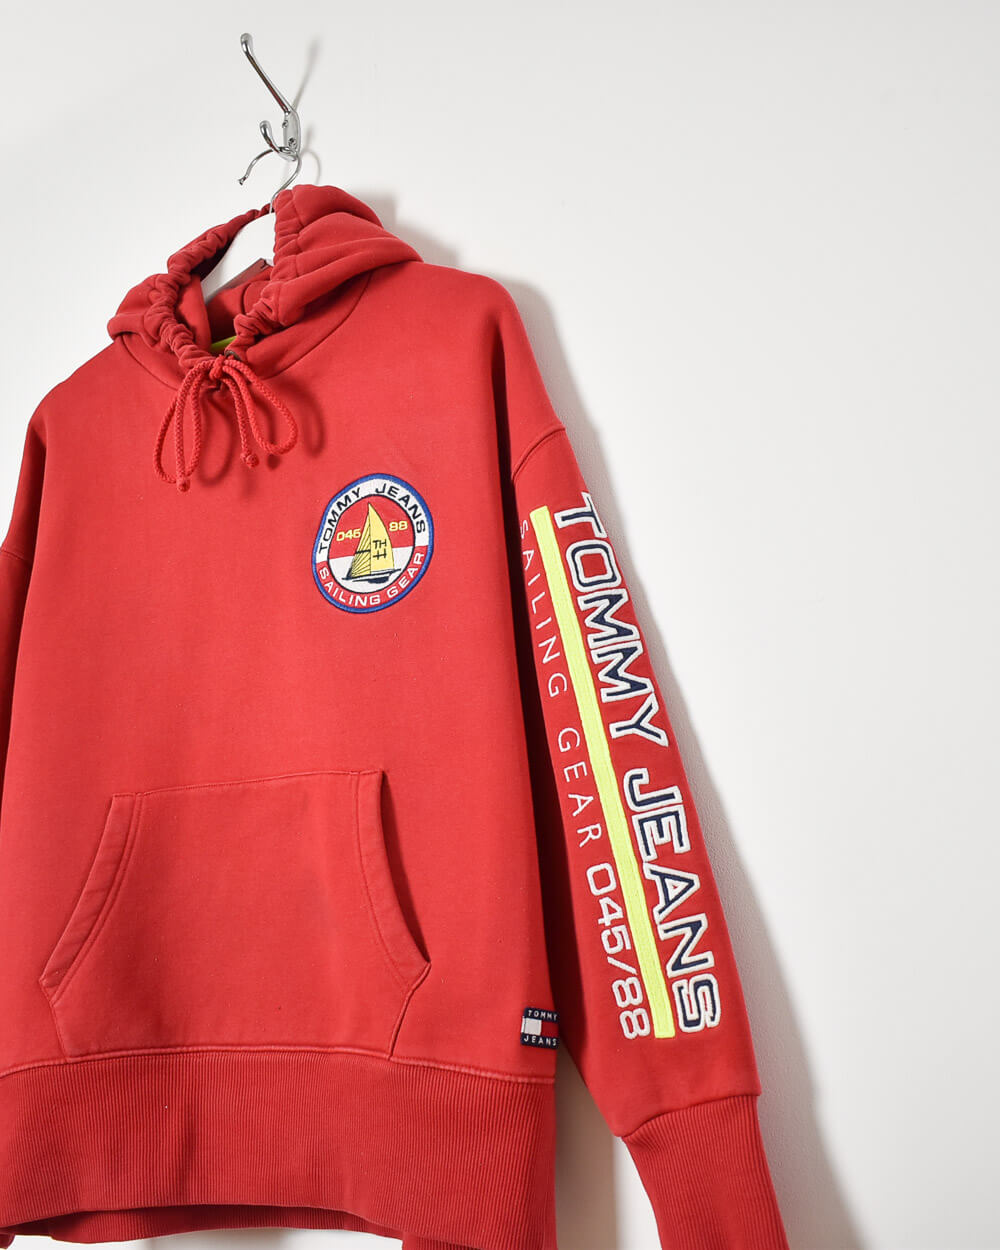 Red Tommy Jeans Sailing Gear Hoodie - Medium